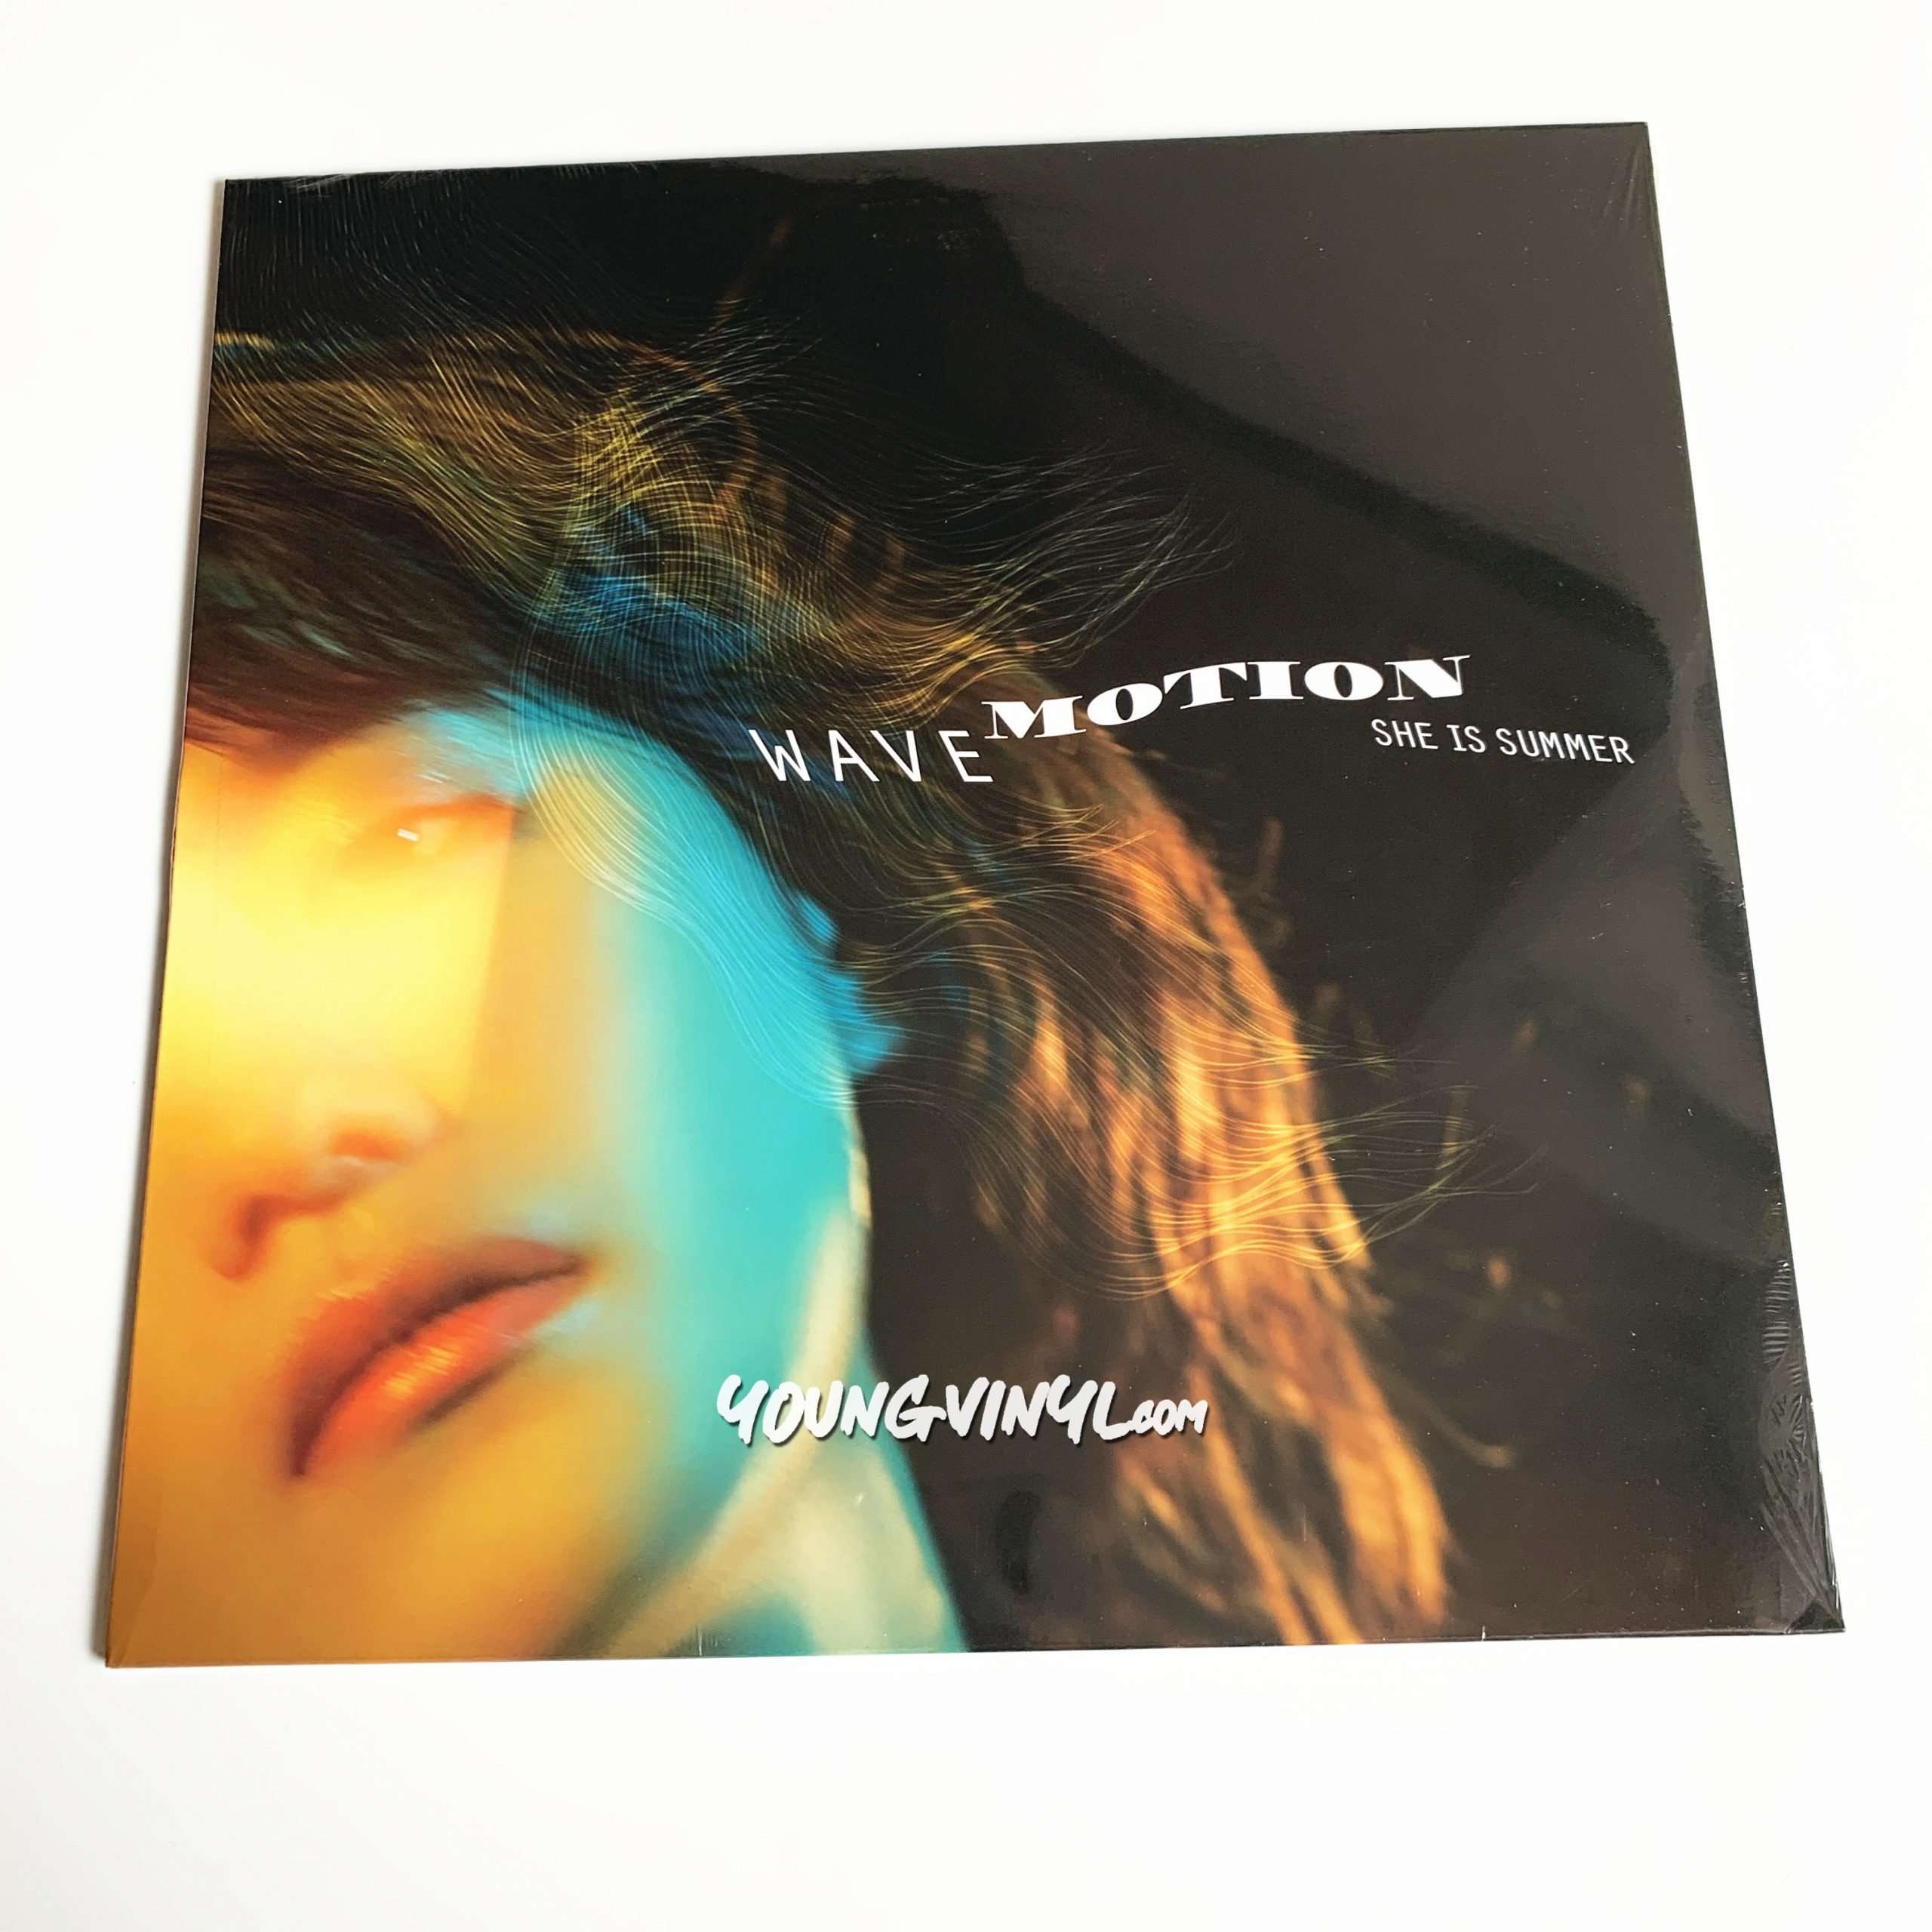 She Is Summer 「Wave Motion」アナログレコード LP - 邦楽